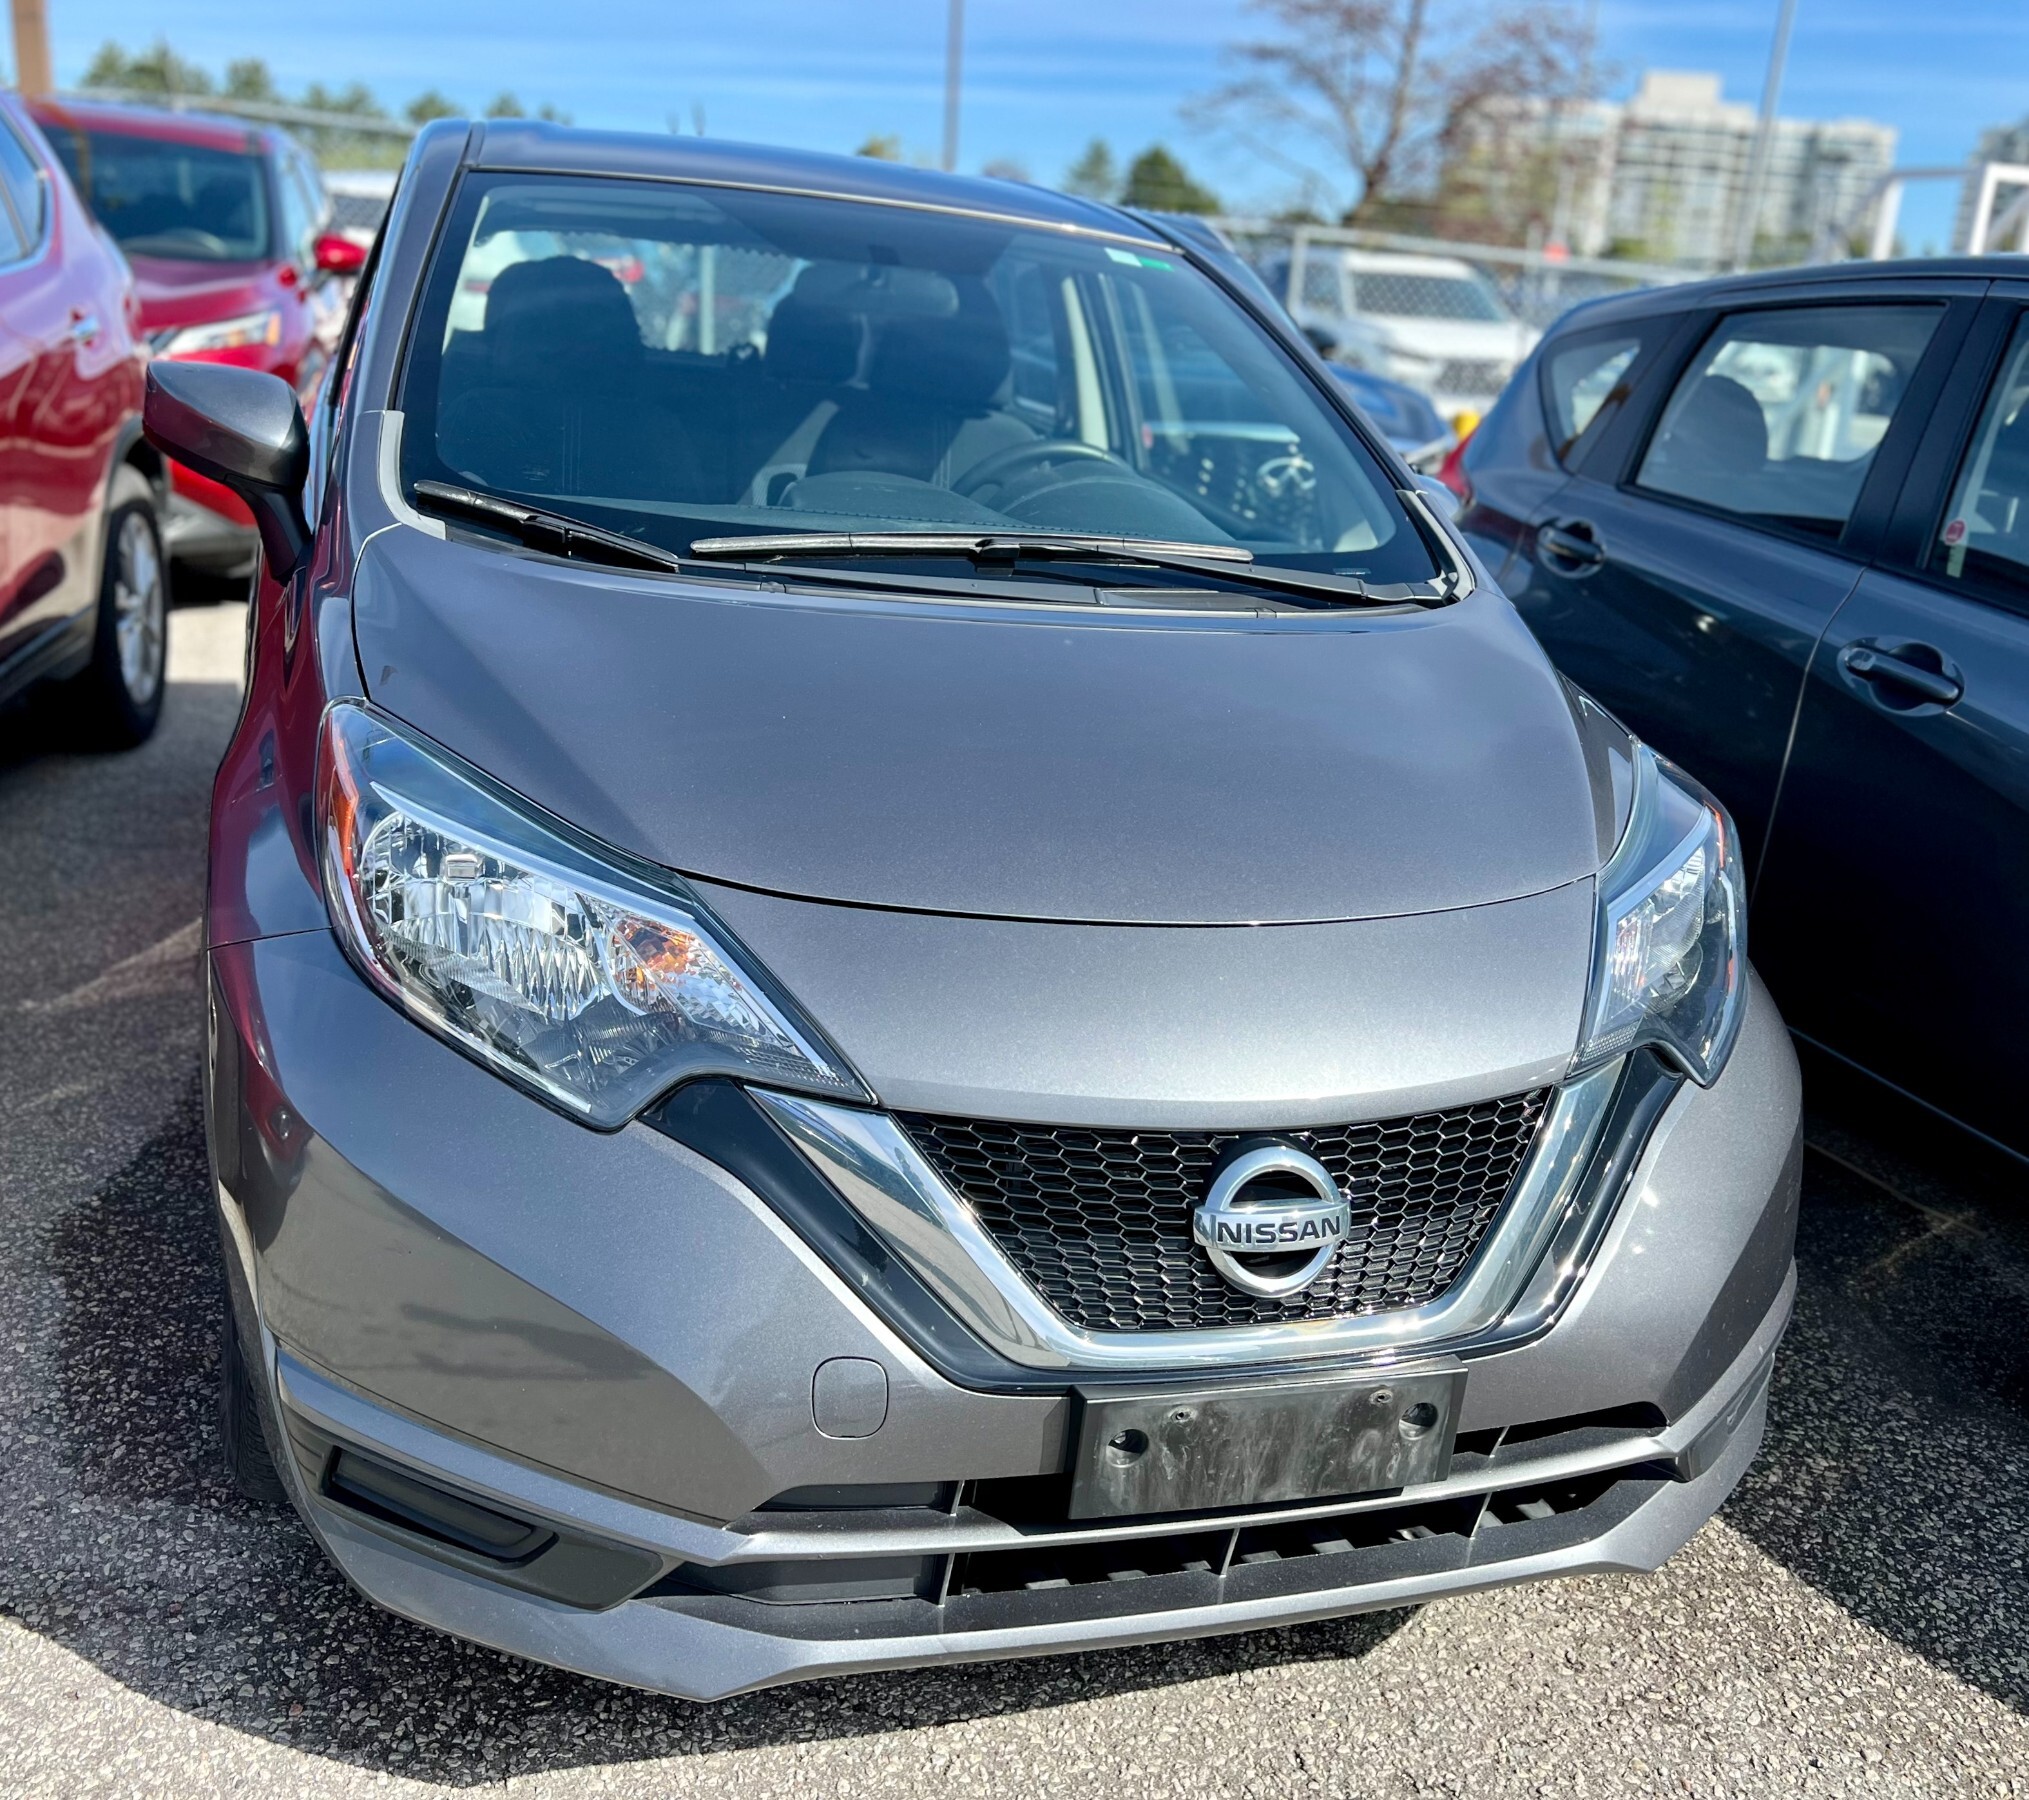 2019 Nissan Versa Note SV - SALE EVENT MAY 24- MAY 25